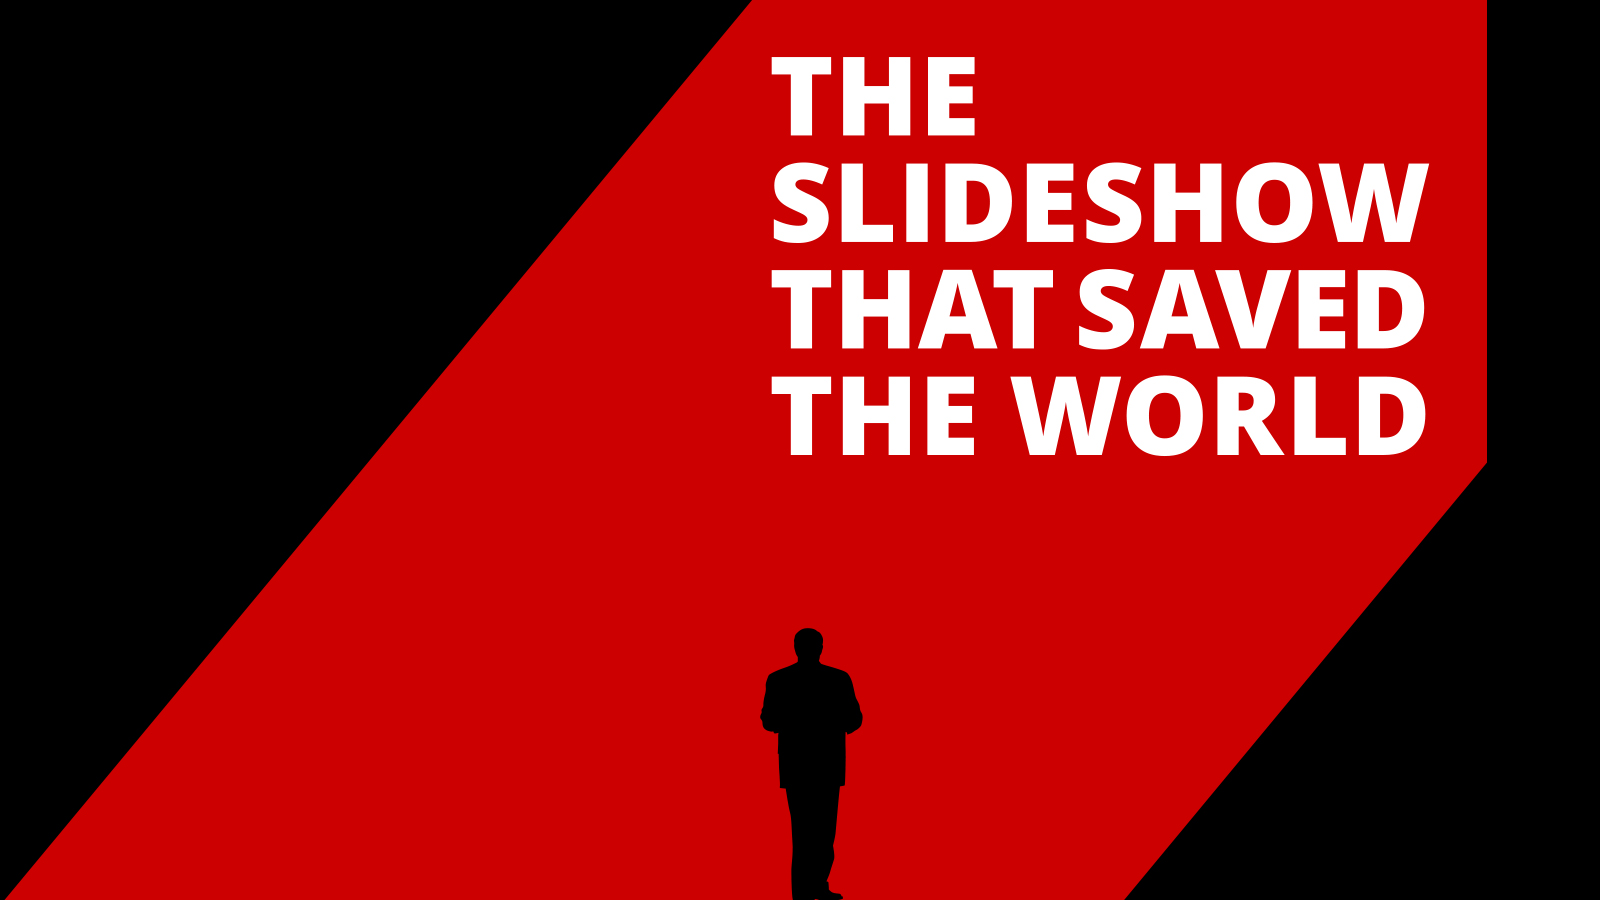 The Slideshow That Saved the World